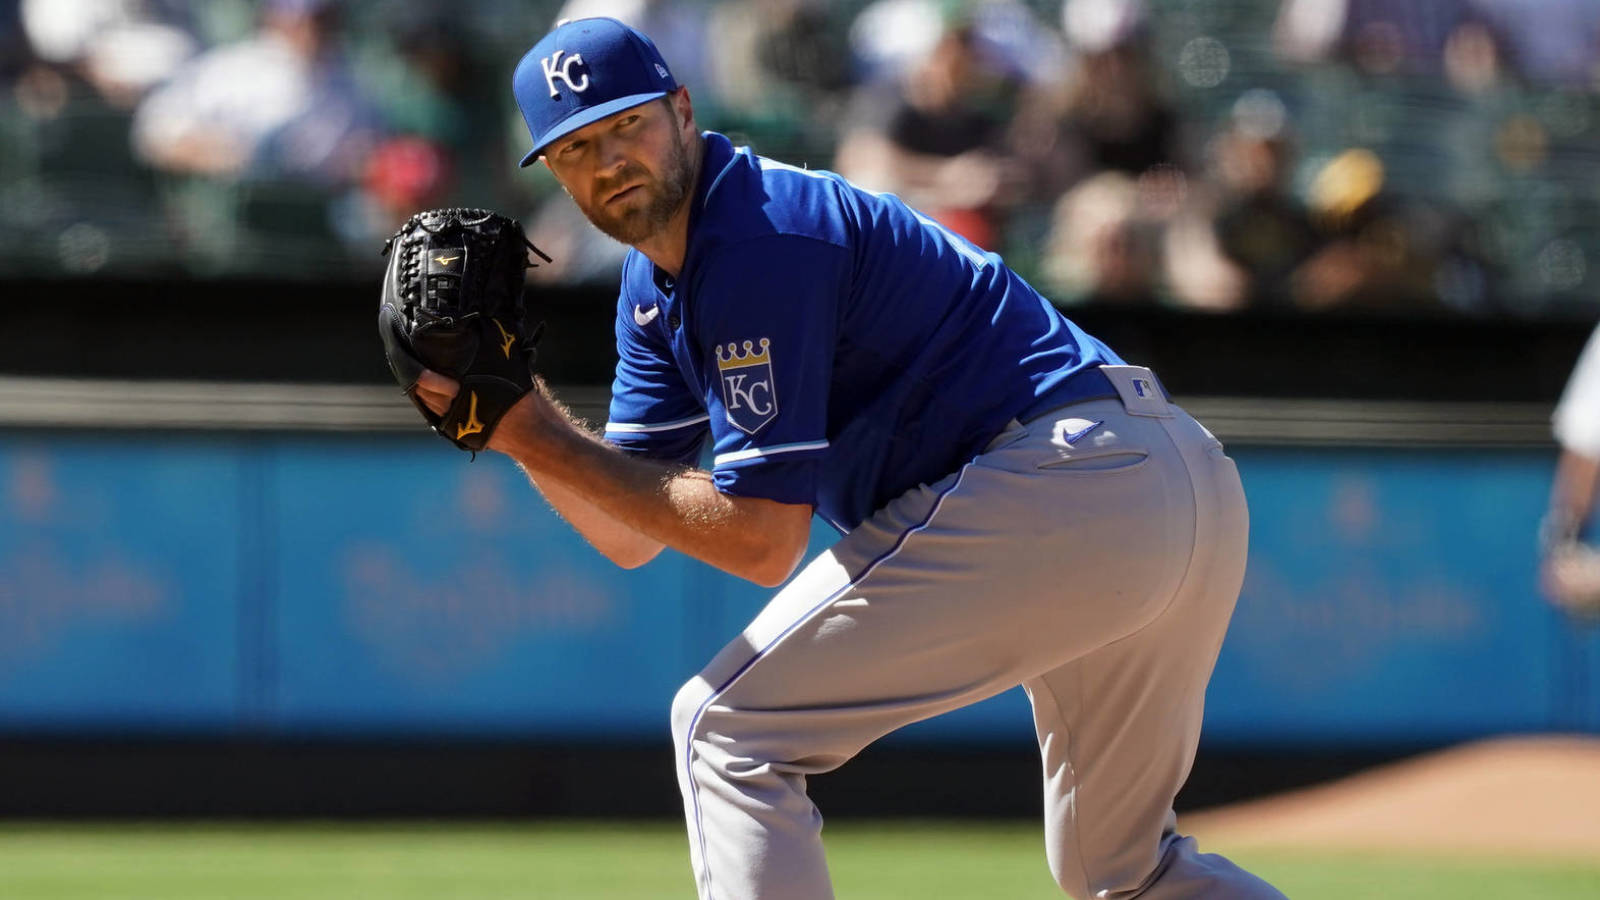 What Wade Davis brings to the Royals (and what other moves do they